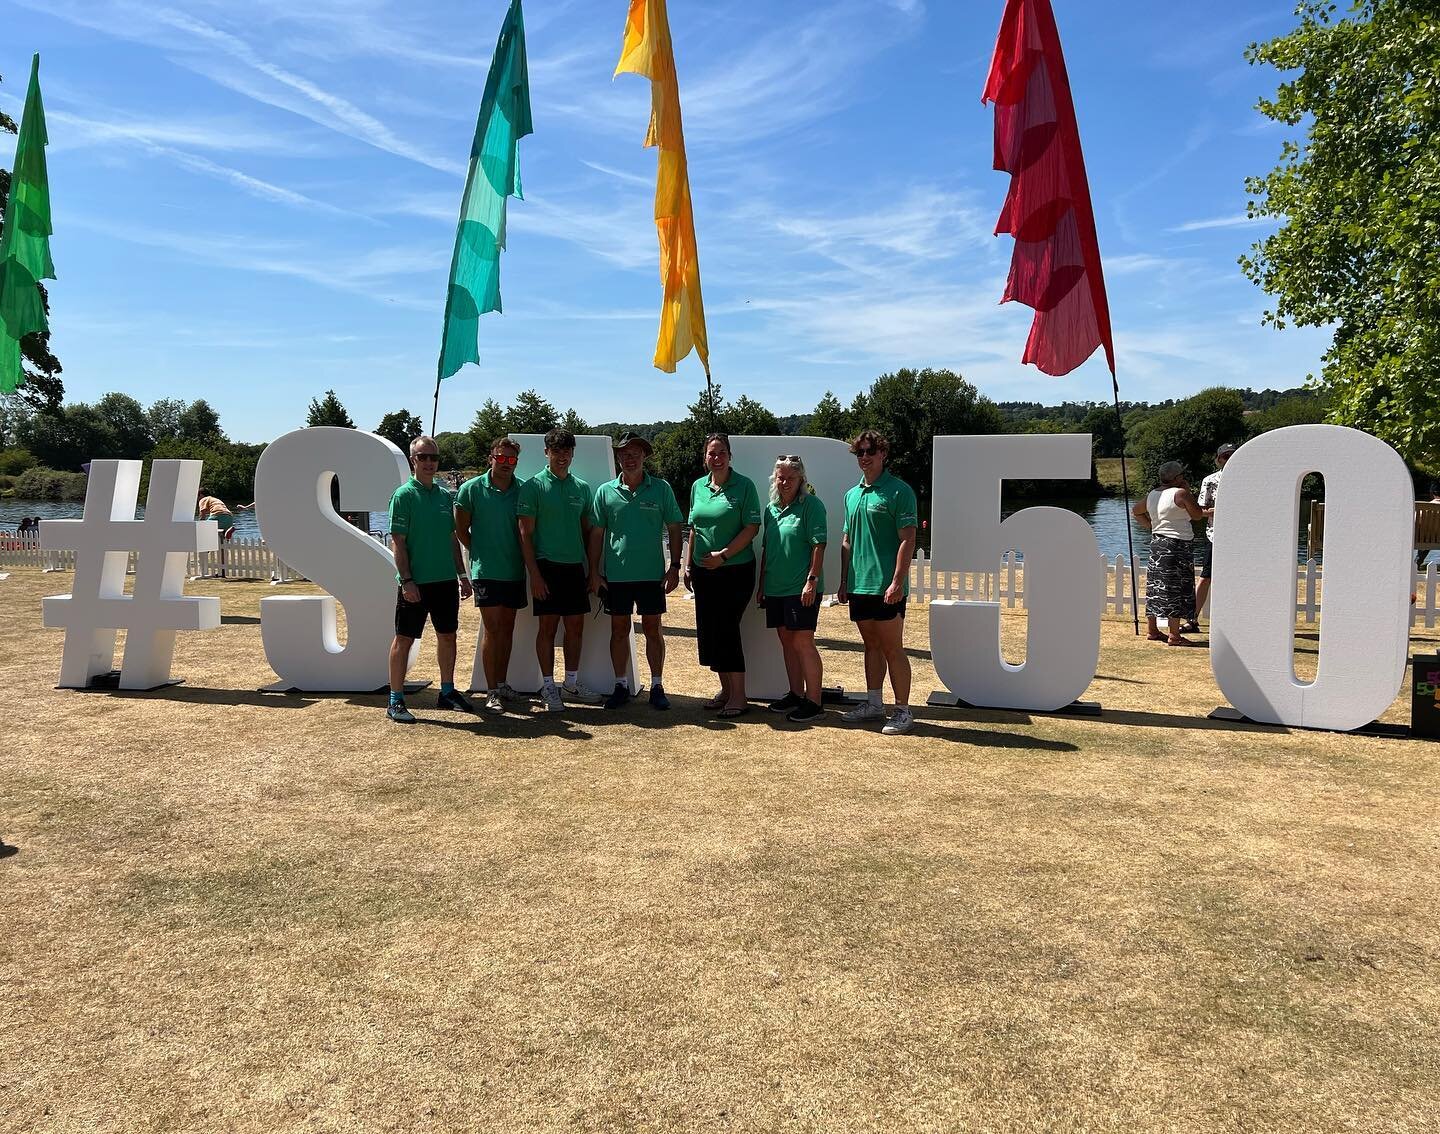 The TAG staff at #SAP50 event on Saturday at @bisham.abbey for some dragon boat racing. Great event and some brilliant weather to compliment it!